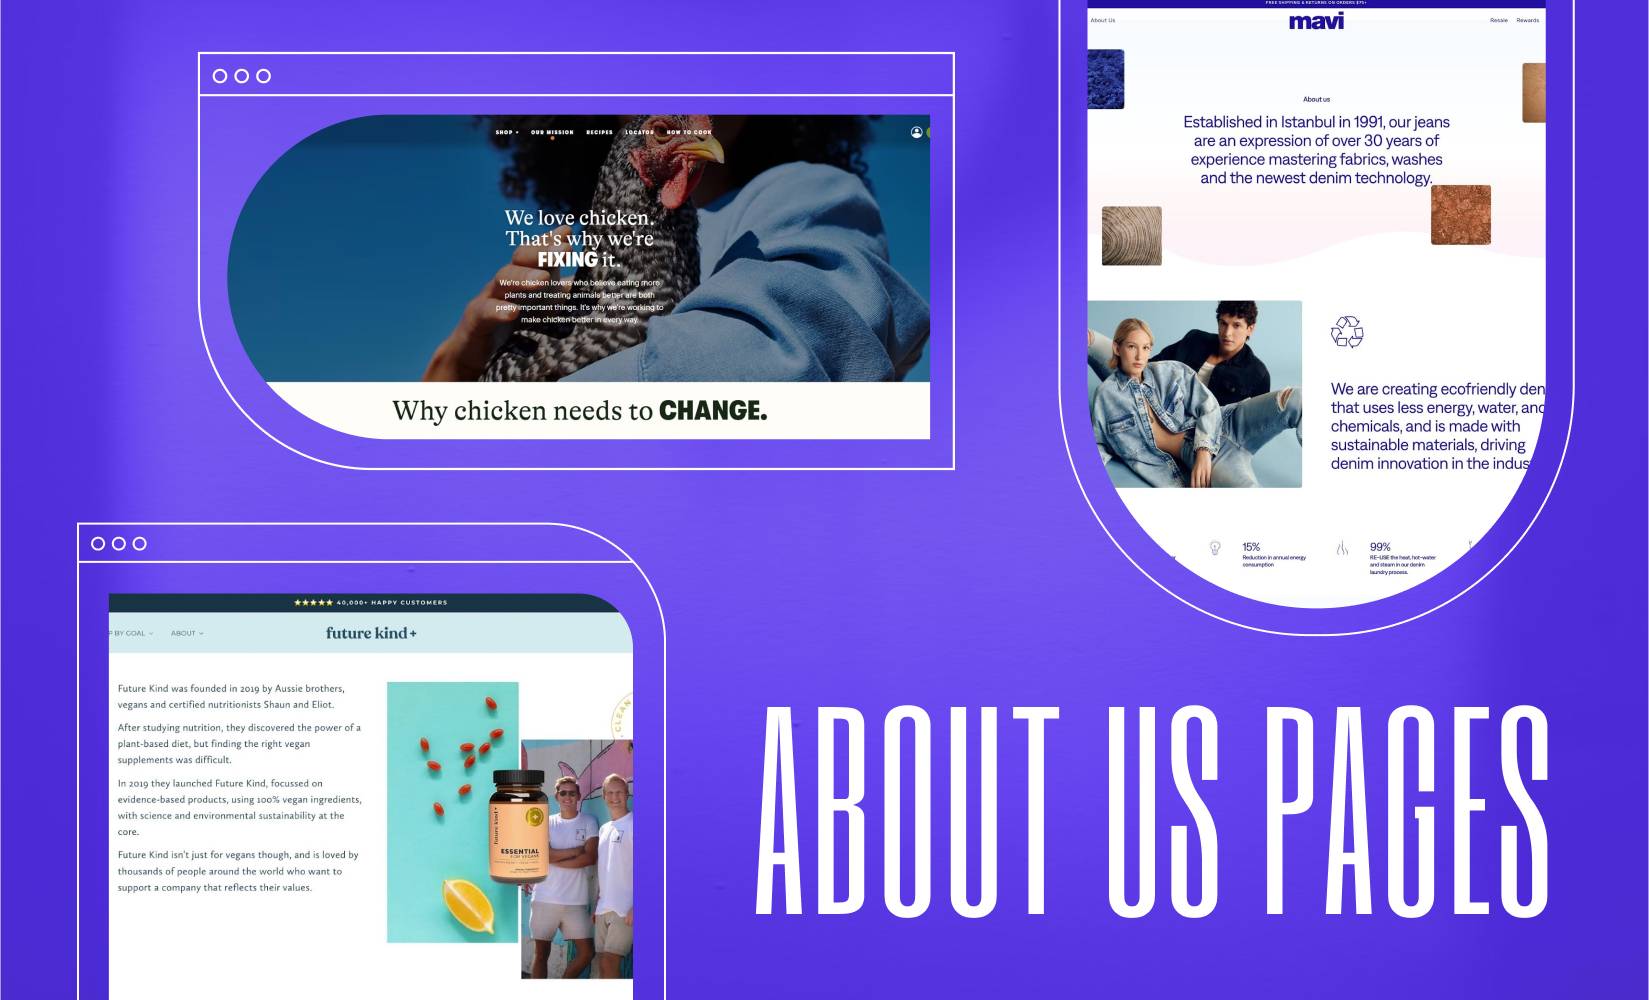 19 Stellar About Us Page Examples & What Makes Them Great